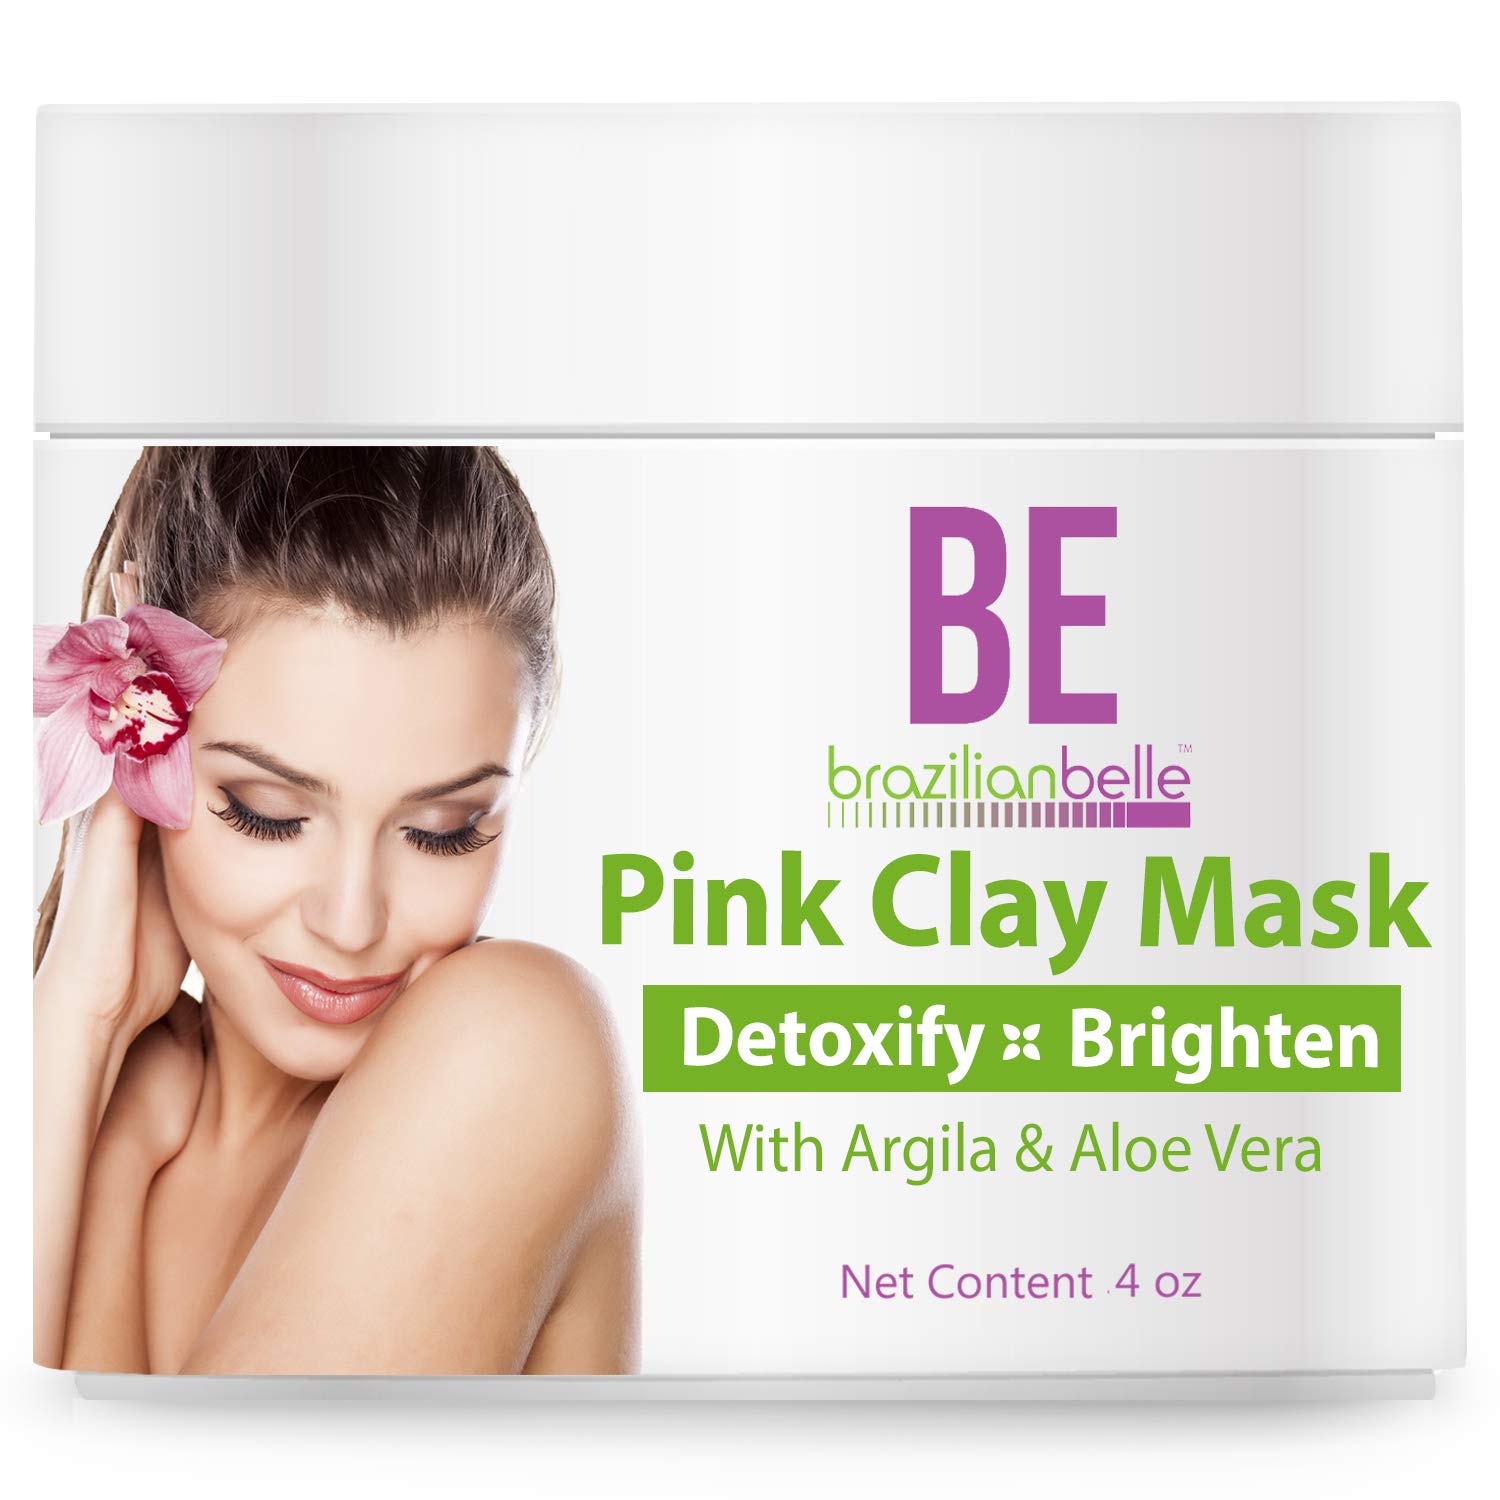 Book Cover Brazilian Belle's Australian Pink Clay Mask for Deep Pore Cleansing | Purifying Facial with Argila, Bentonite Clay & Aloe Vera to help Unclog & Shrink Pores | 4 oz